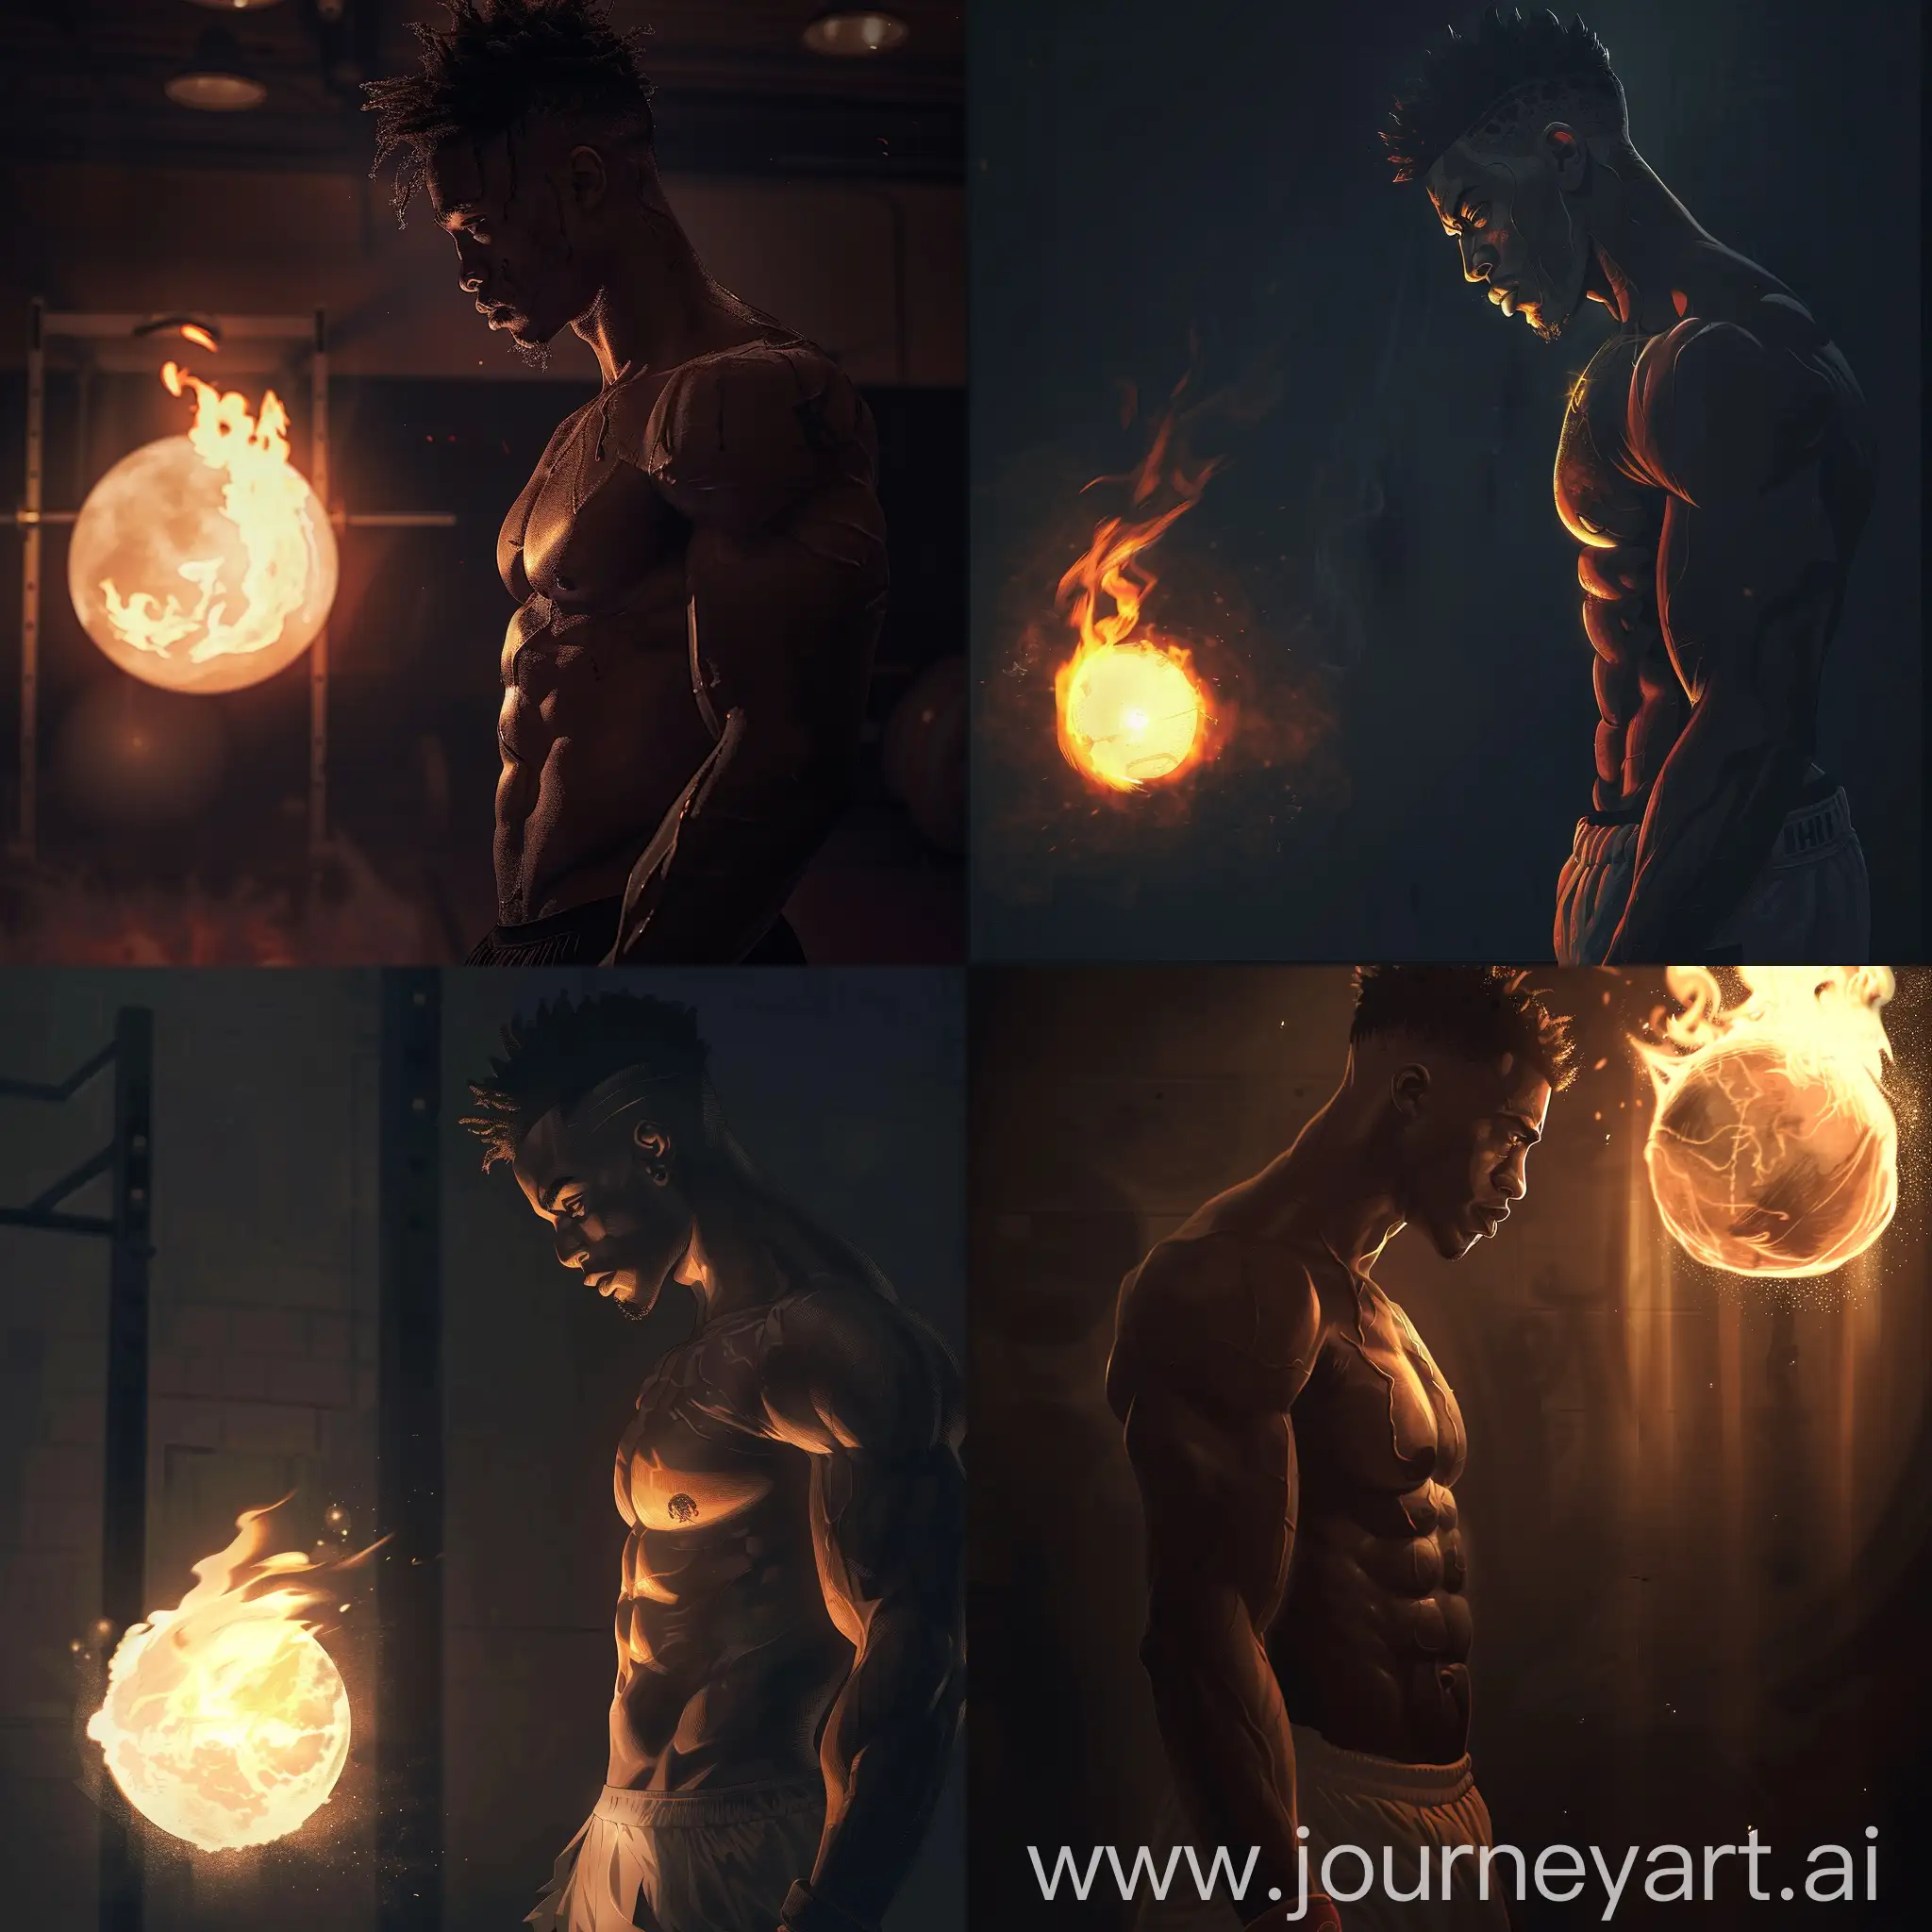 Anime style, slim lean strong , fit black man with hair in a soft short puff ,standing in a dark room looking down at a ball on fire, the light from the fire illuminates the front of his body, dressed in muay thai gym attire, only showing the front view of his body 